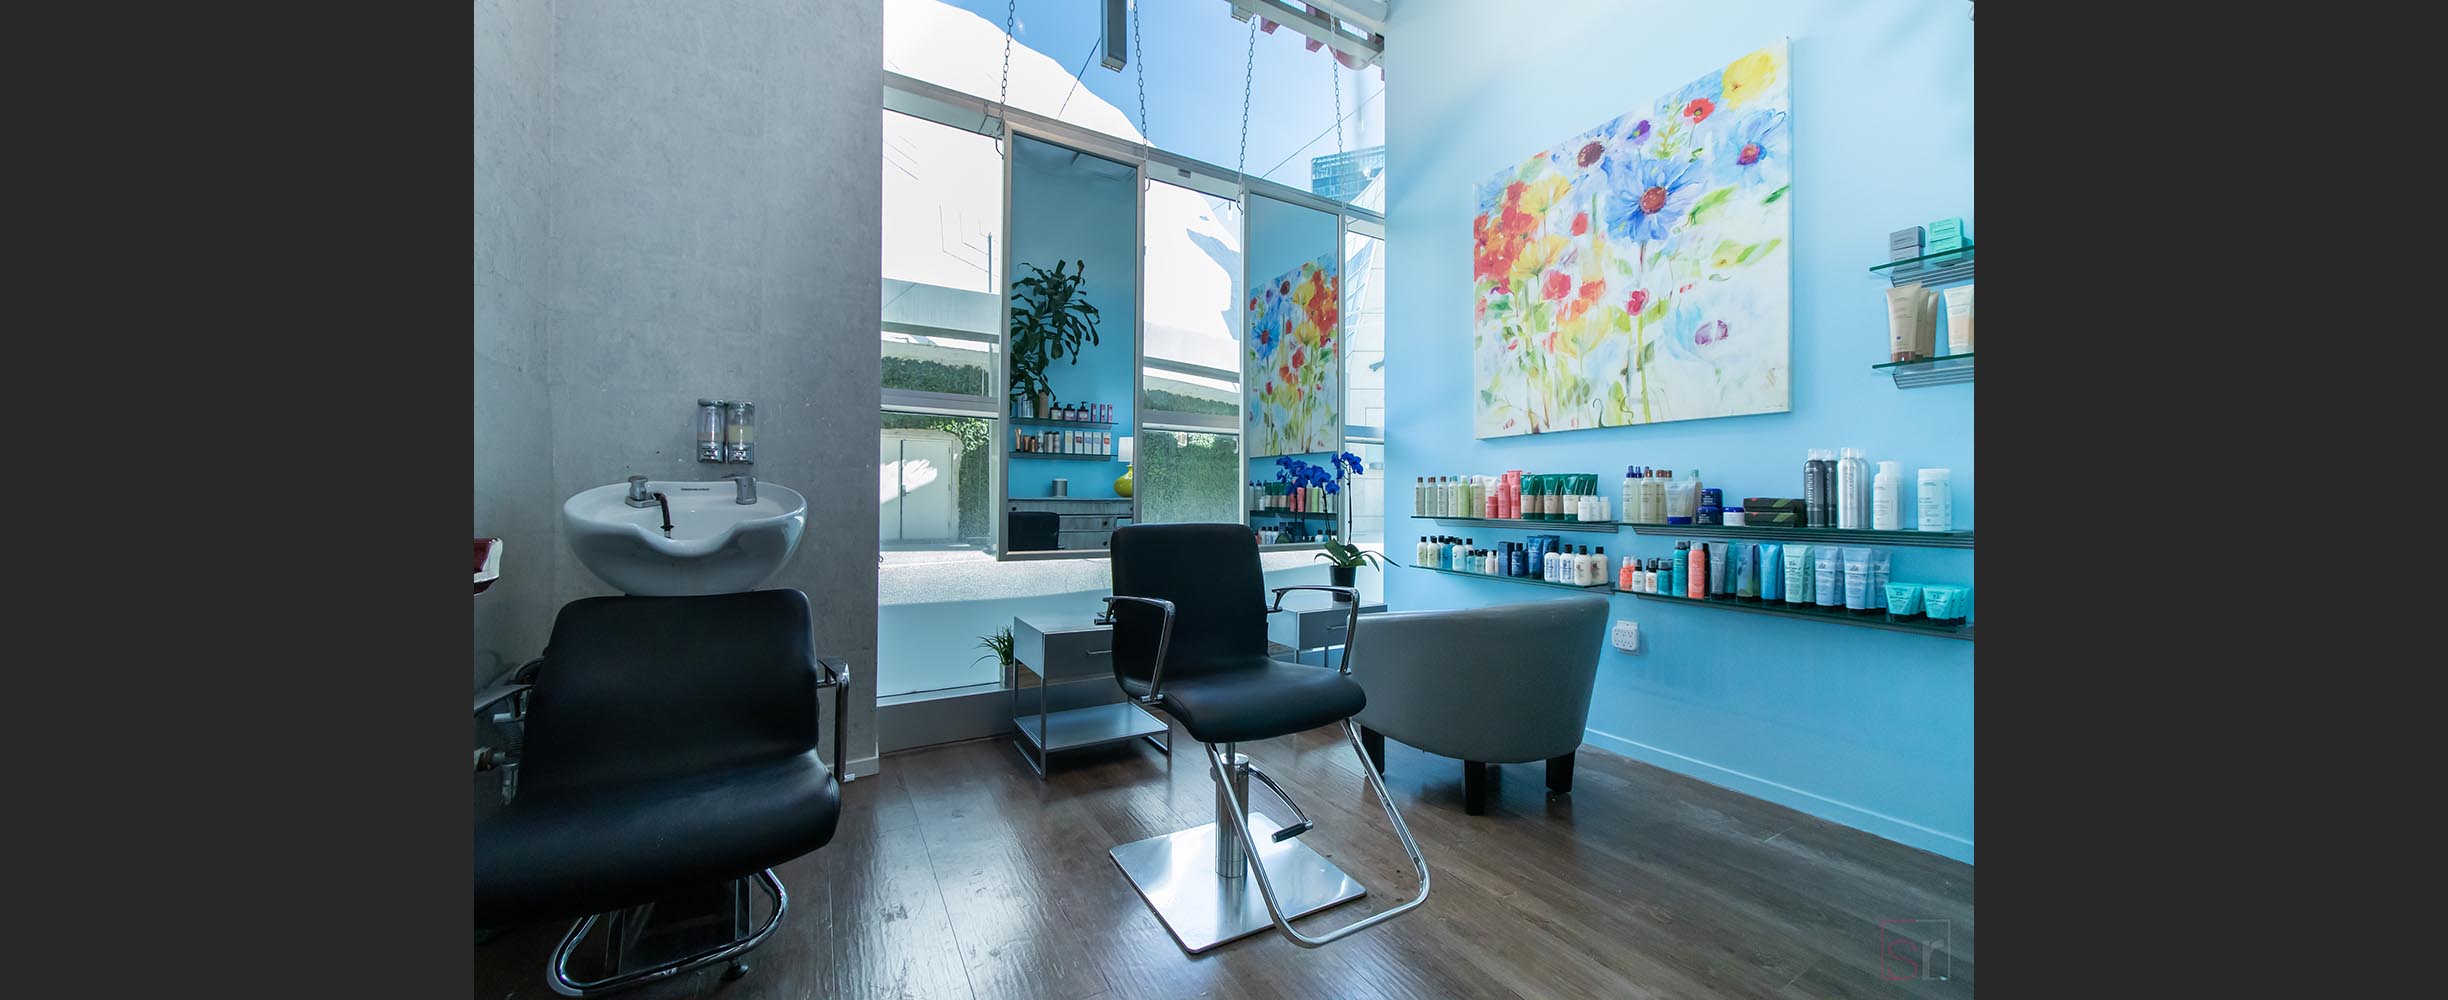 Hair salon for women and men in Los Angeles.